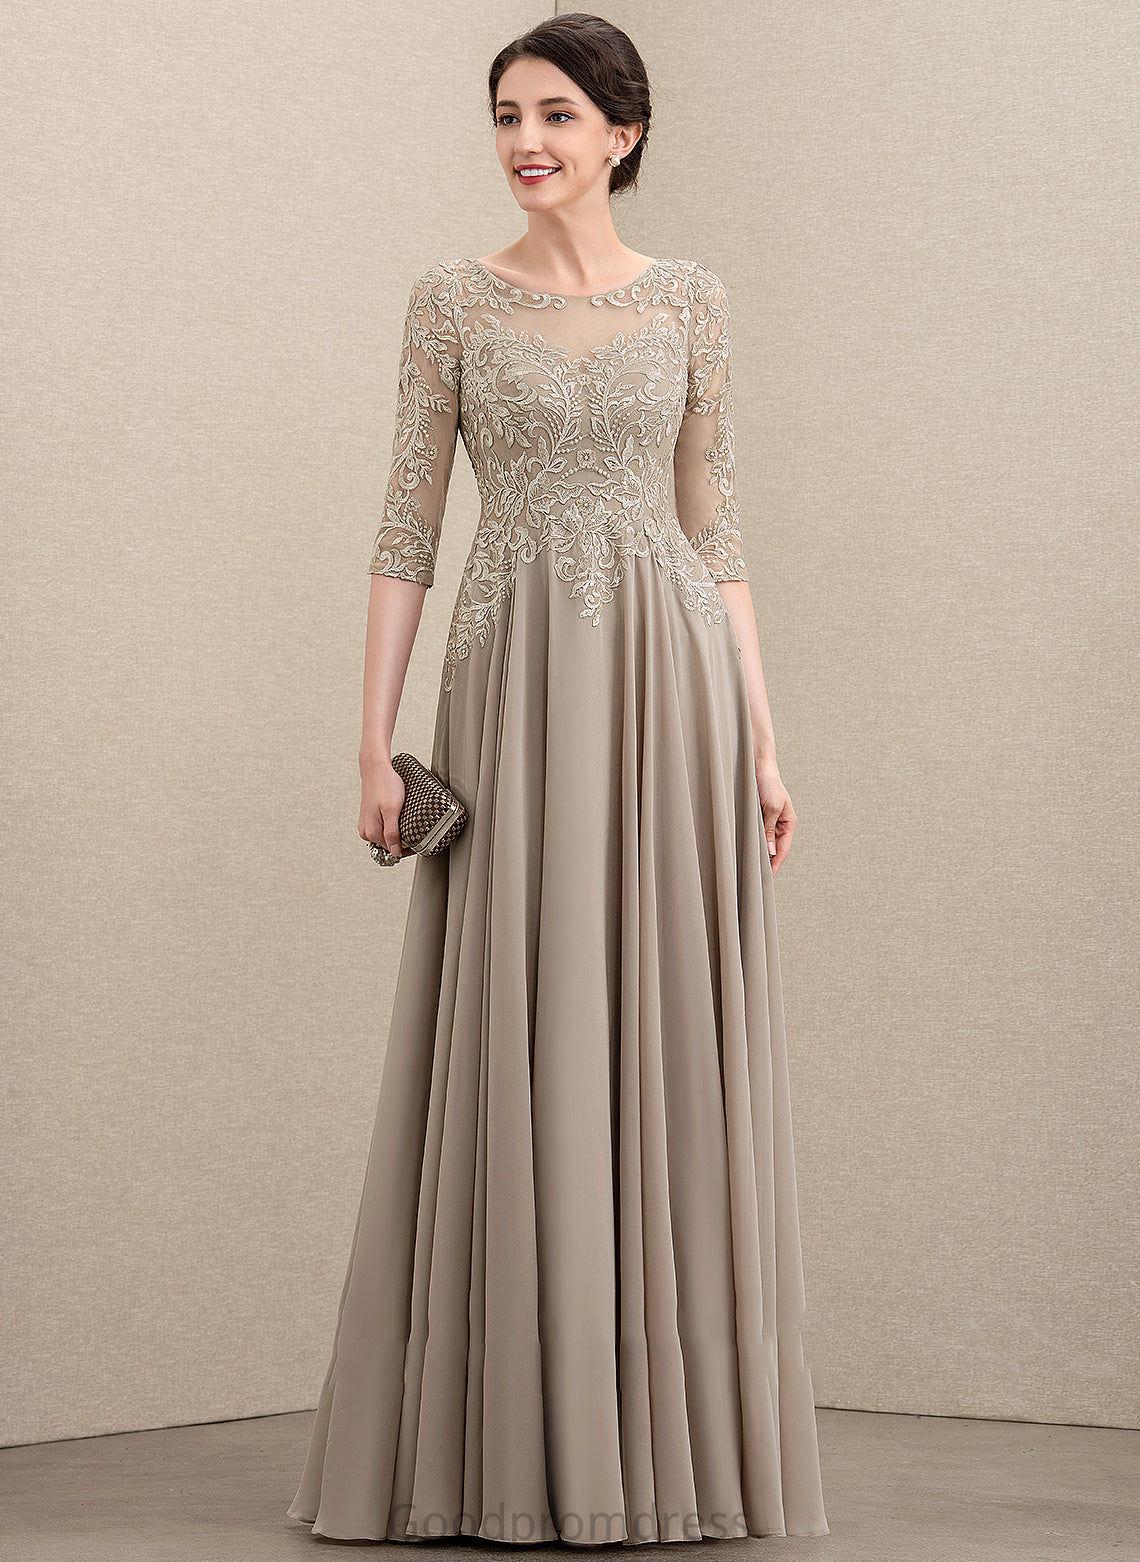 A-Line Chiffon Mother Sequins the Mother of the Bride Dresses With Dress Lace Scoop Floor-Length Makenna of Bride Neck